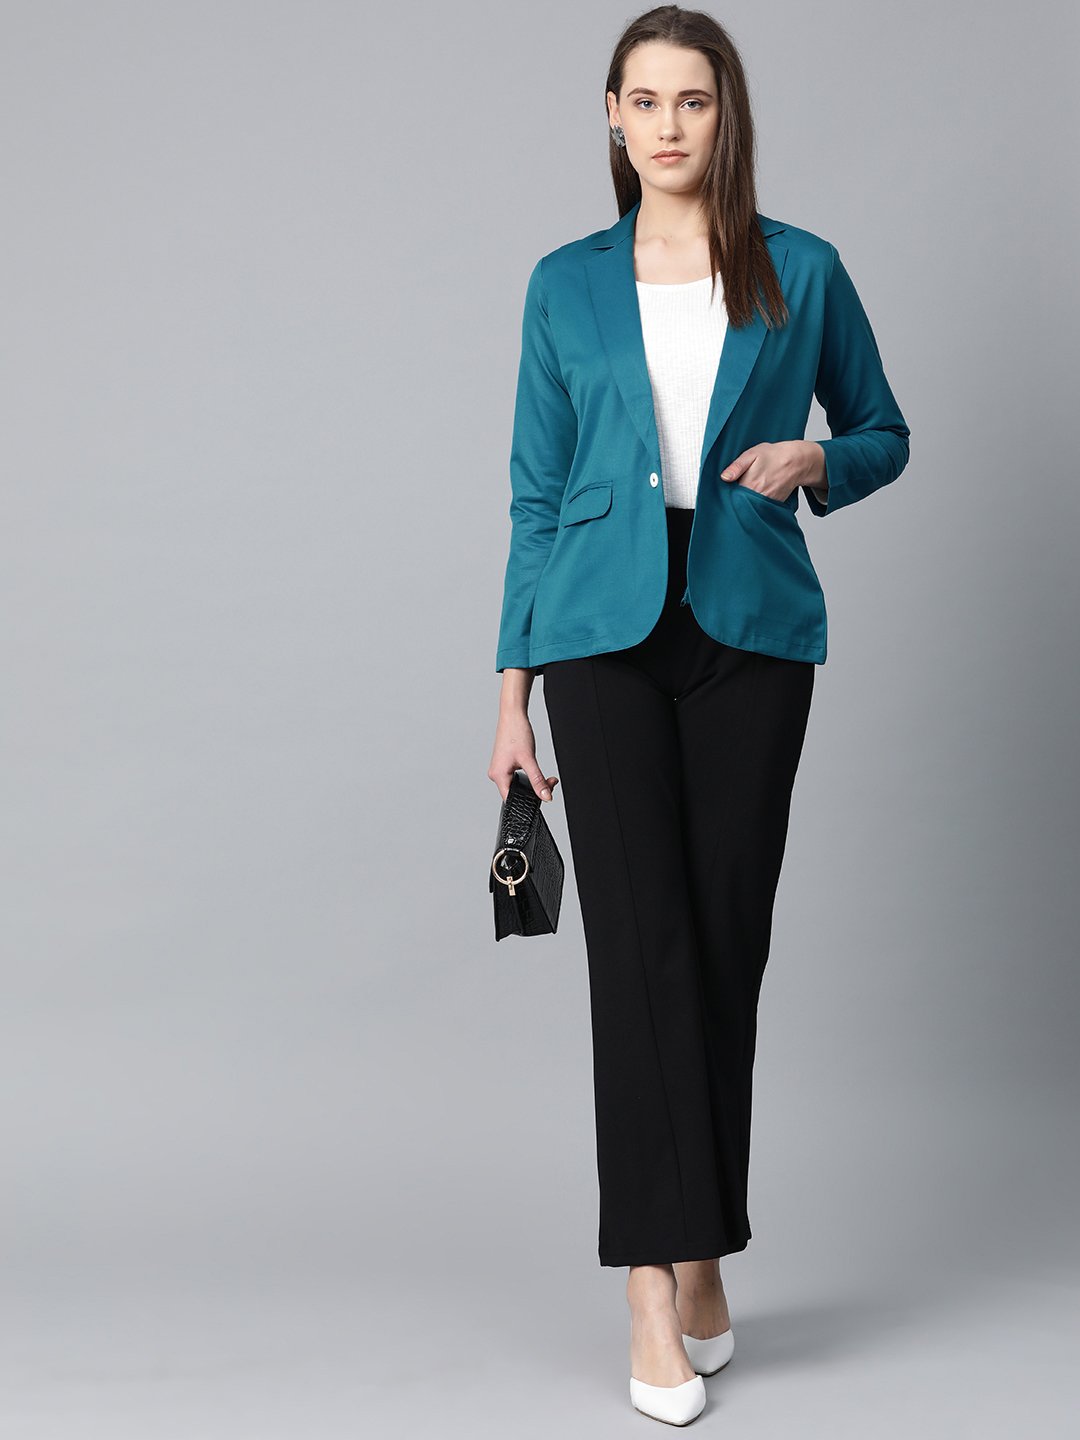 Women's Teal Blue Solid Single Breasted Smart Casual Blazer - Jompers